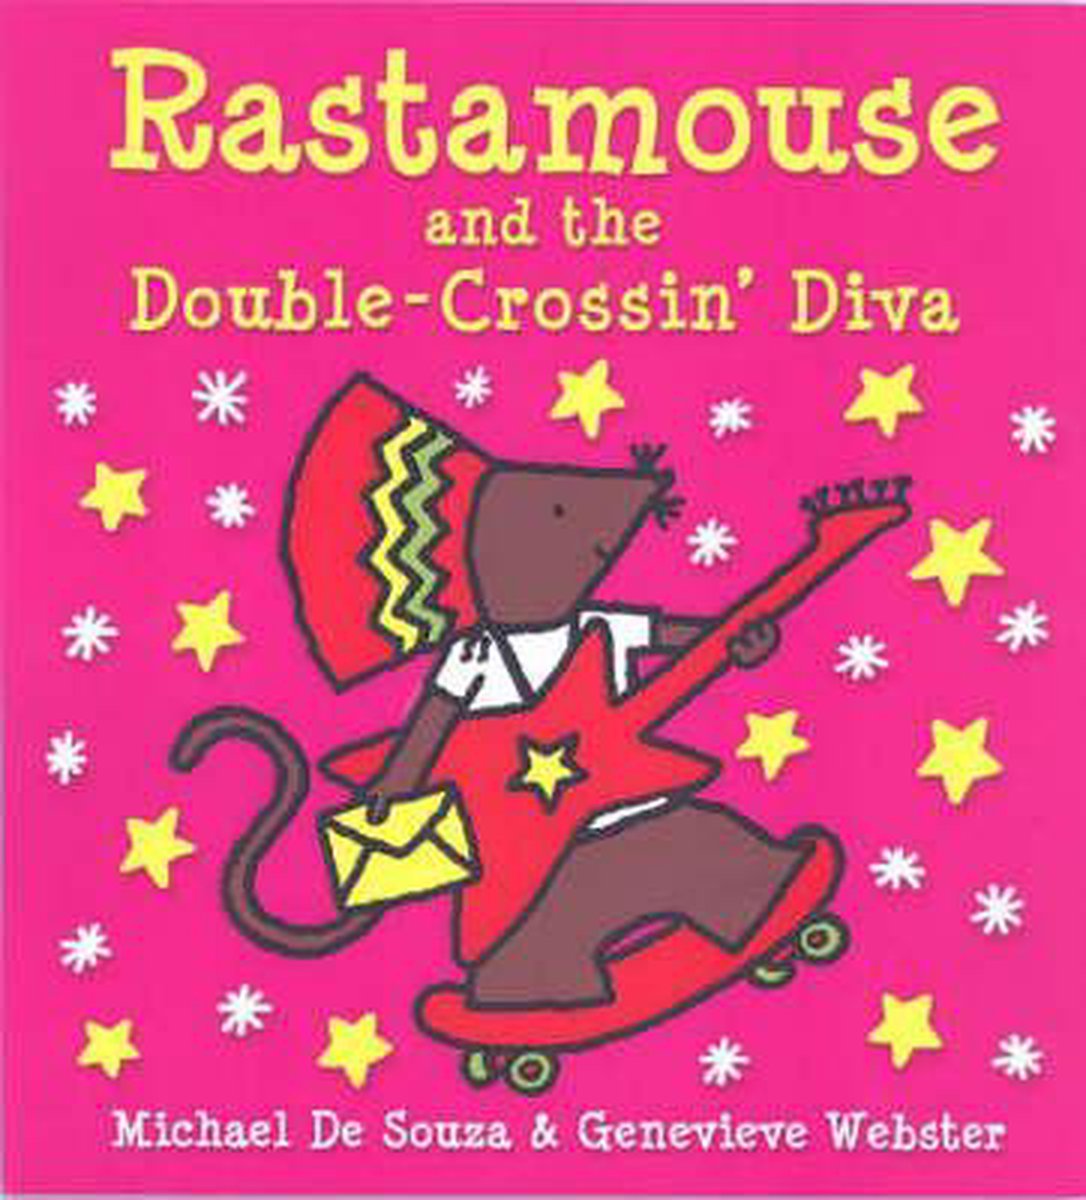 Rastamouse and the Double-crossin' Diva